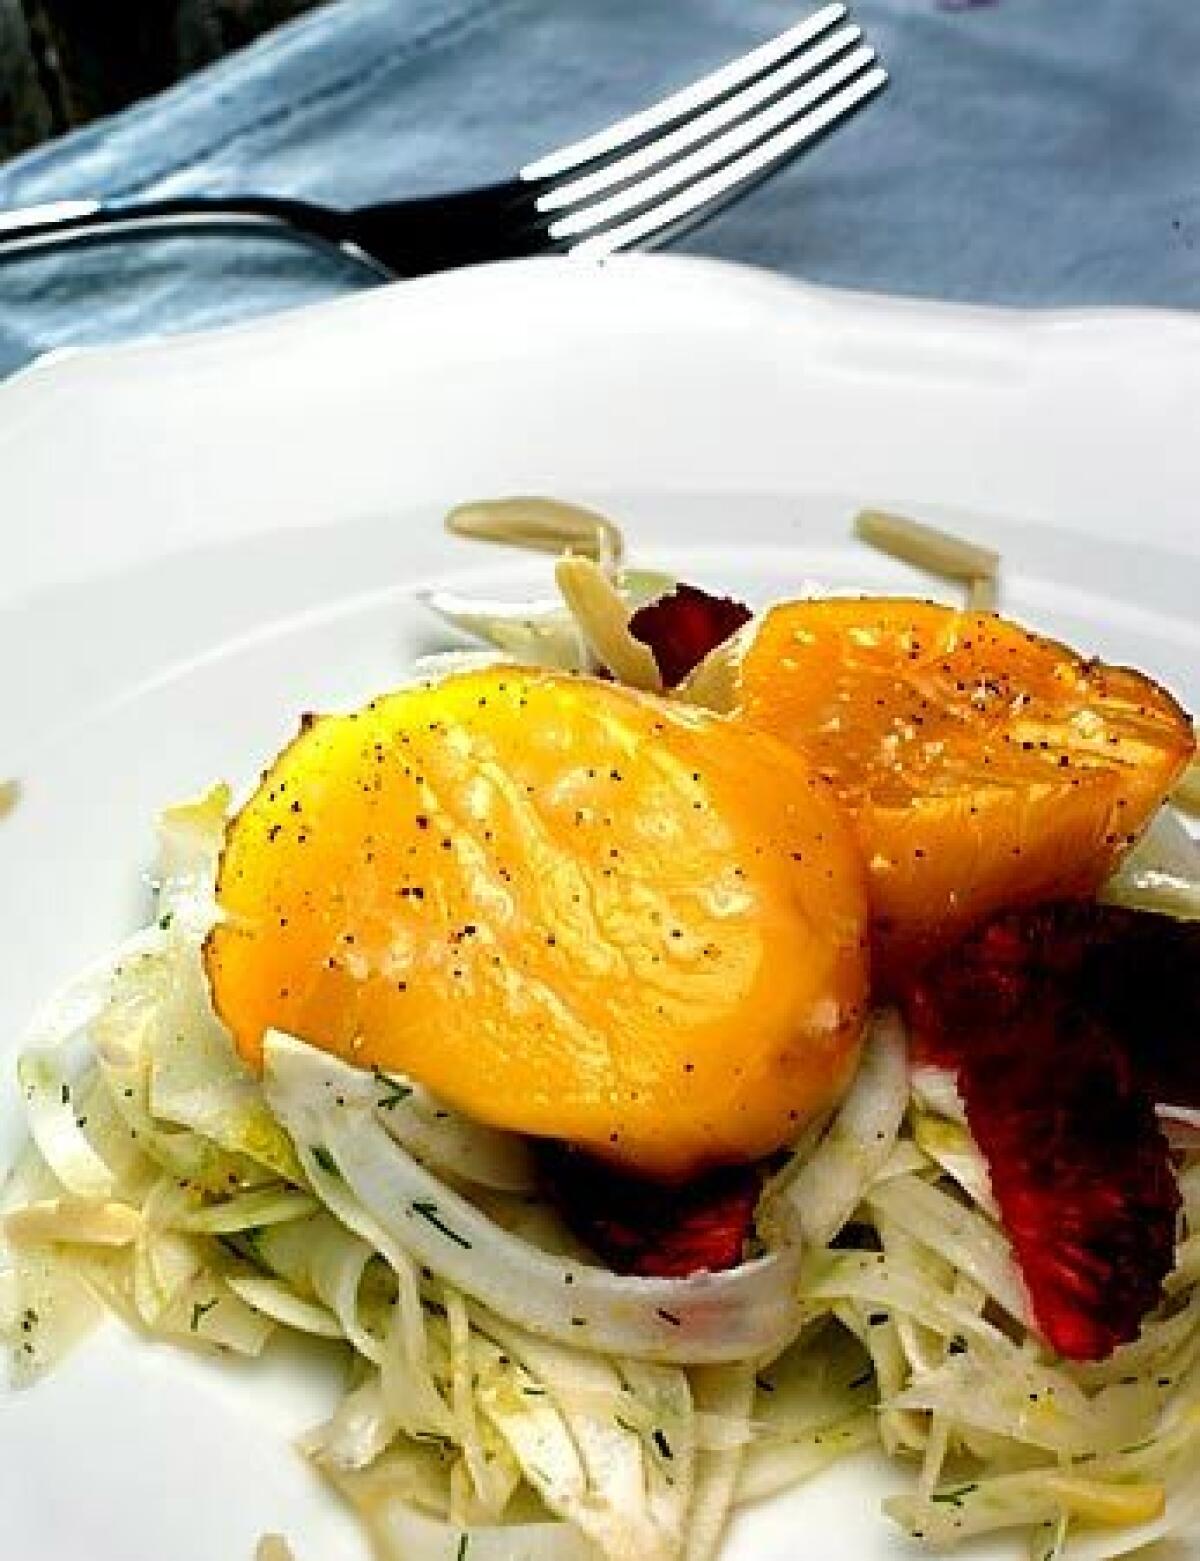 Alder-smoked scallops with fennel salad